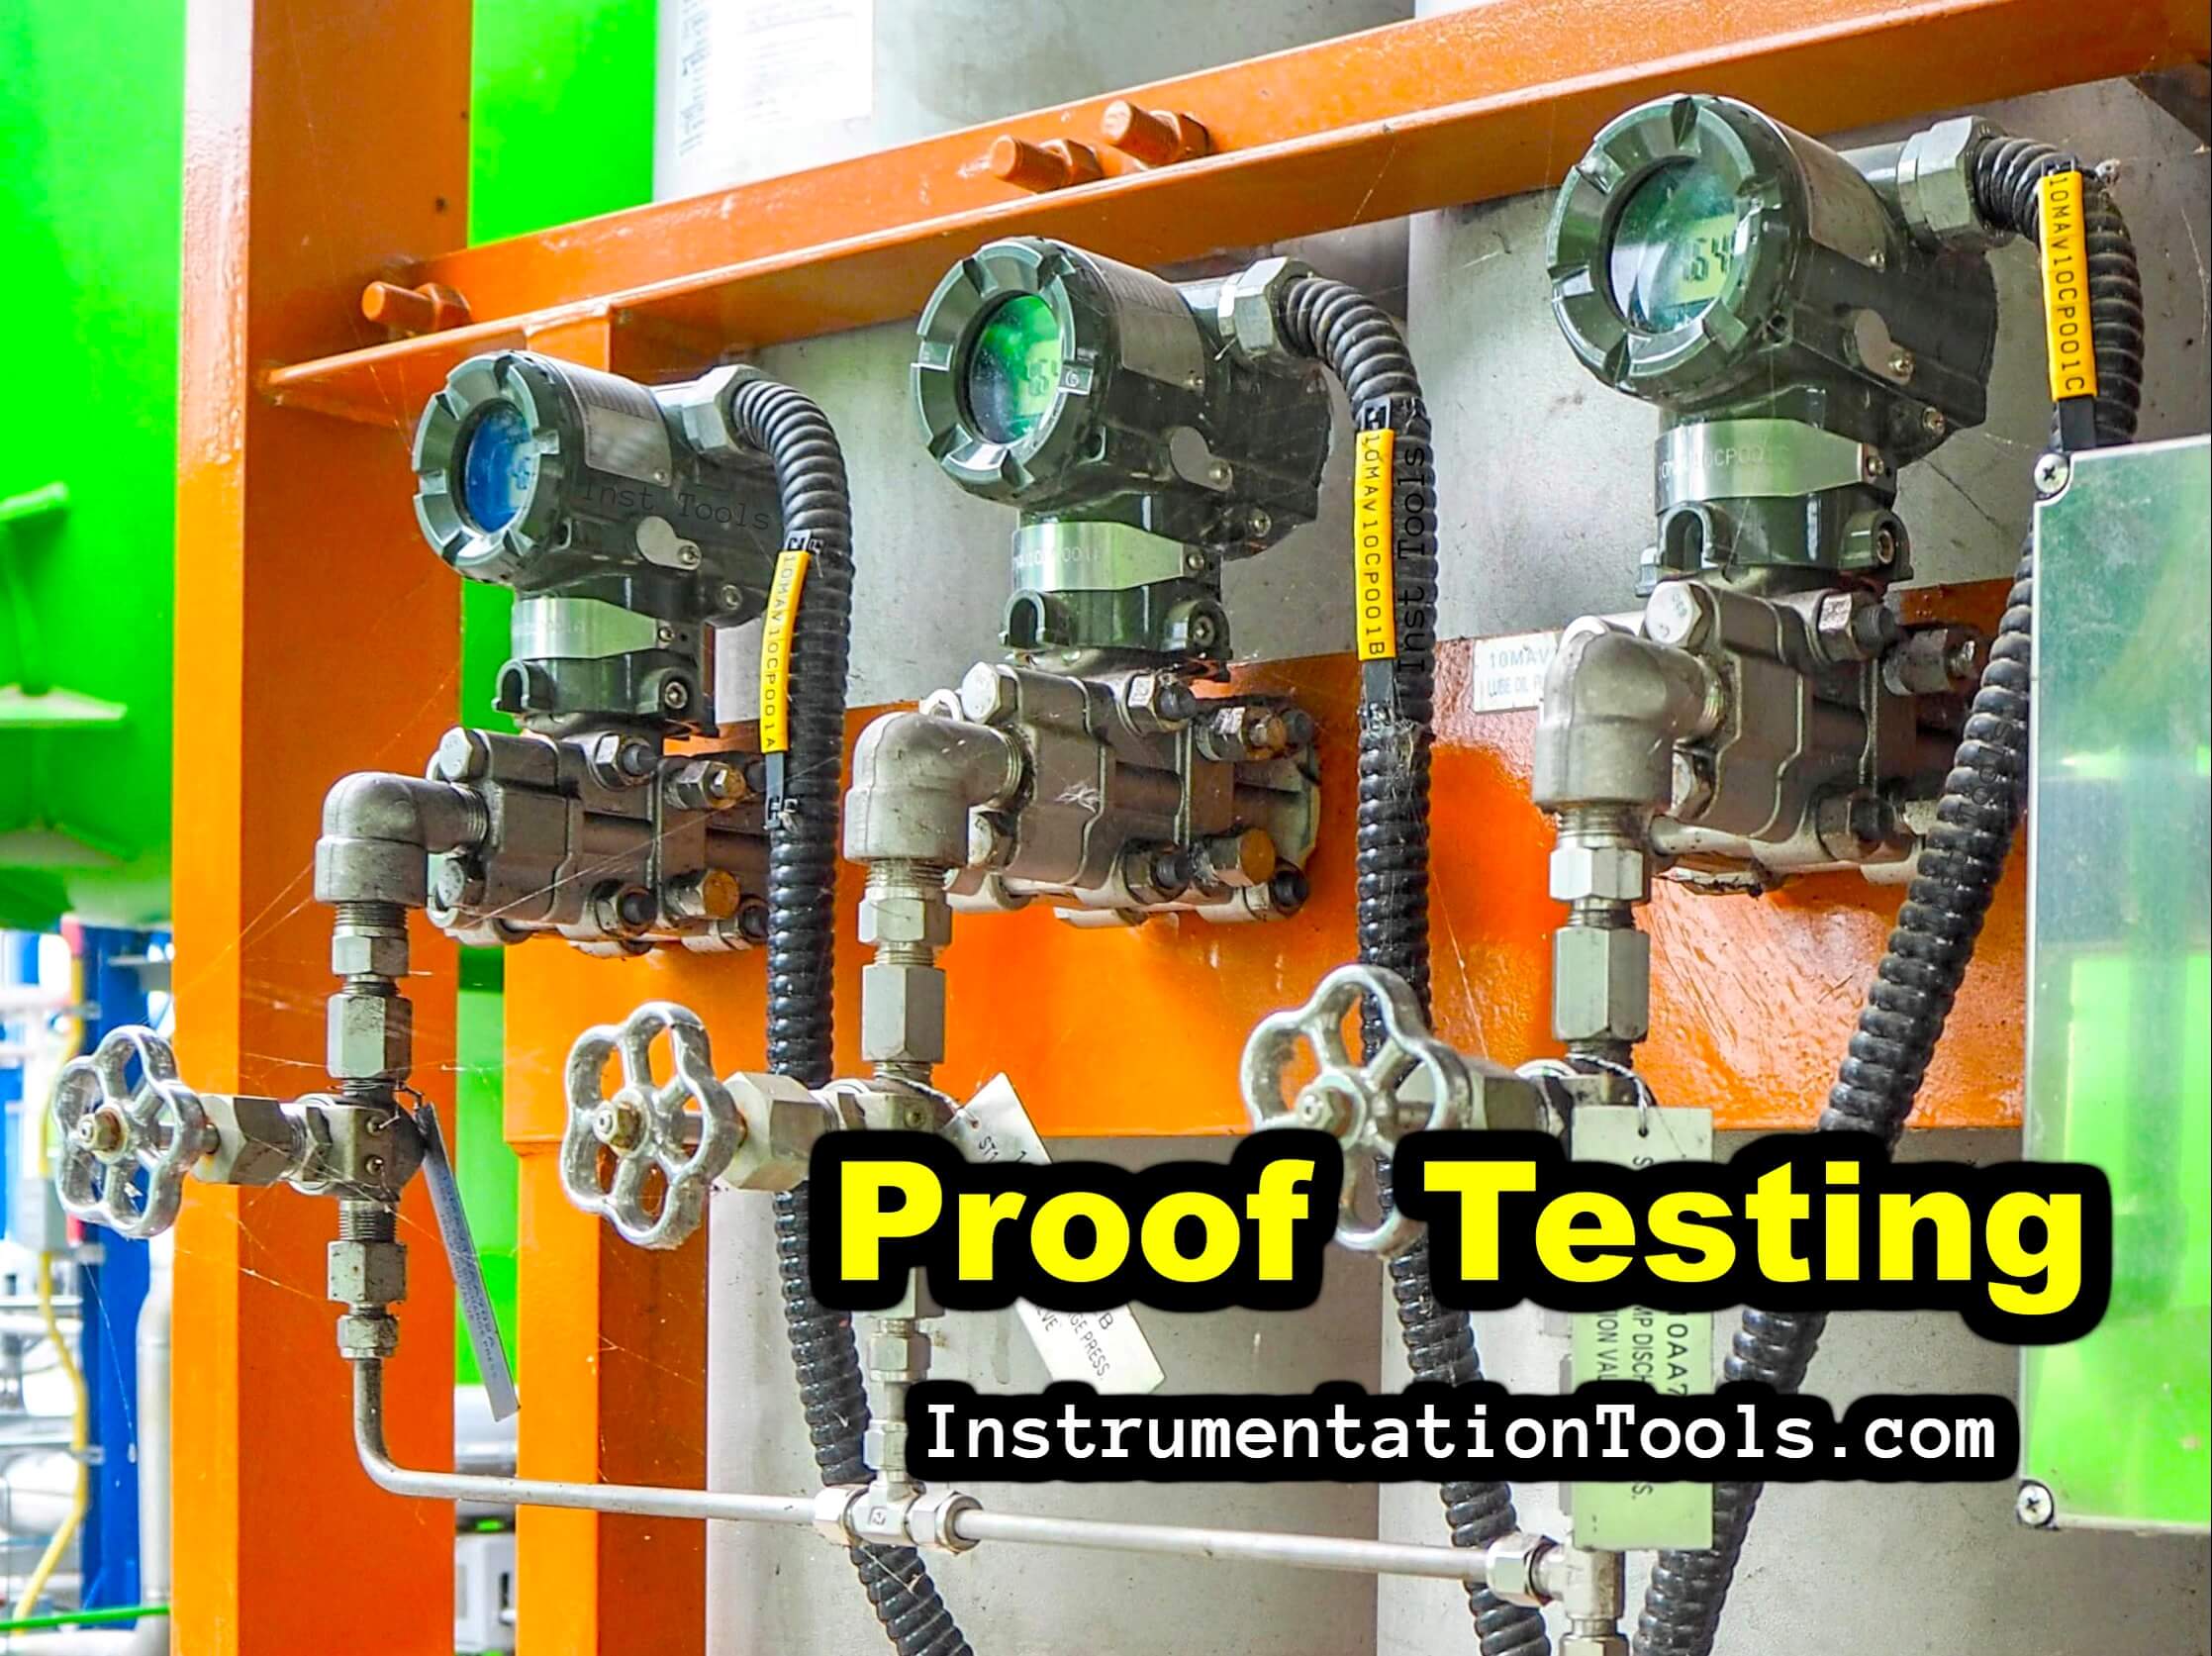 Proof Testing - Safety Instrumented System (SIS)